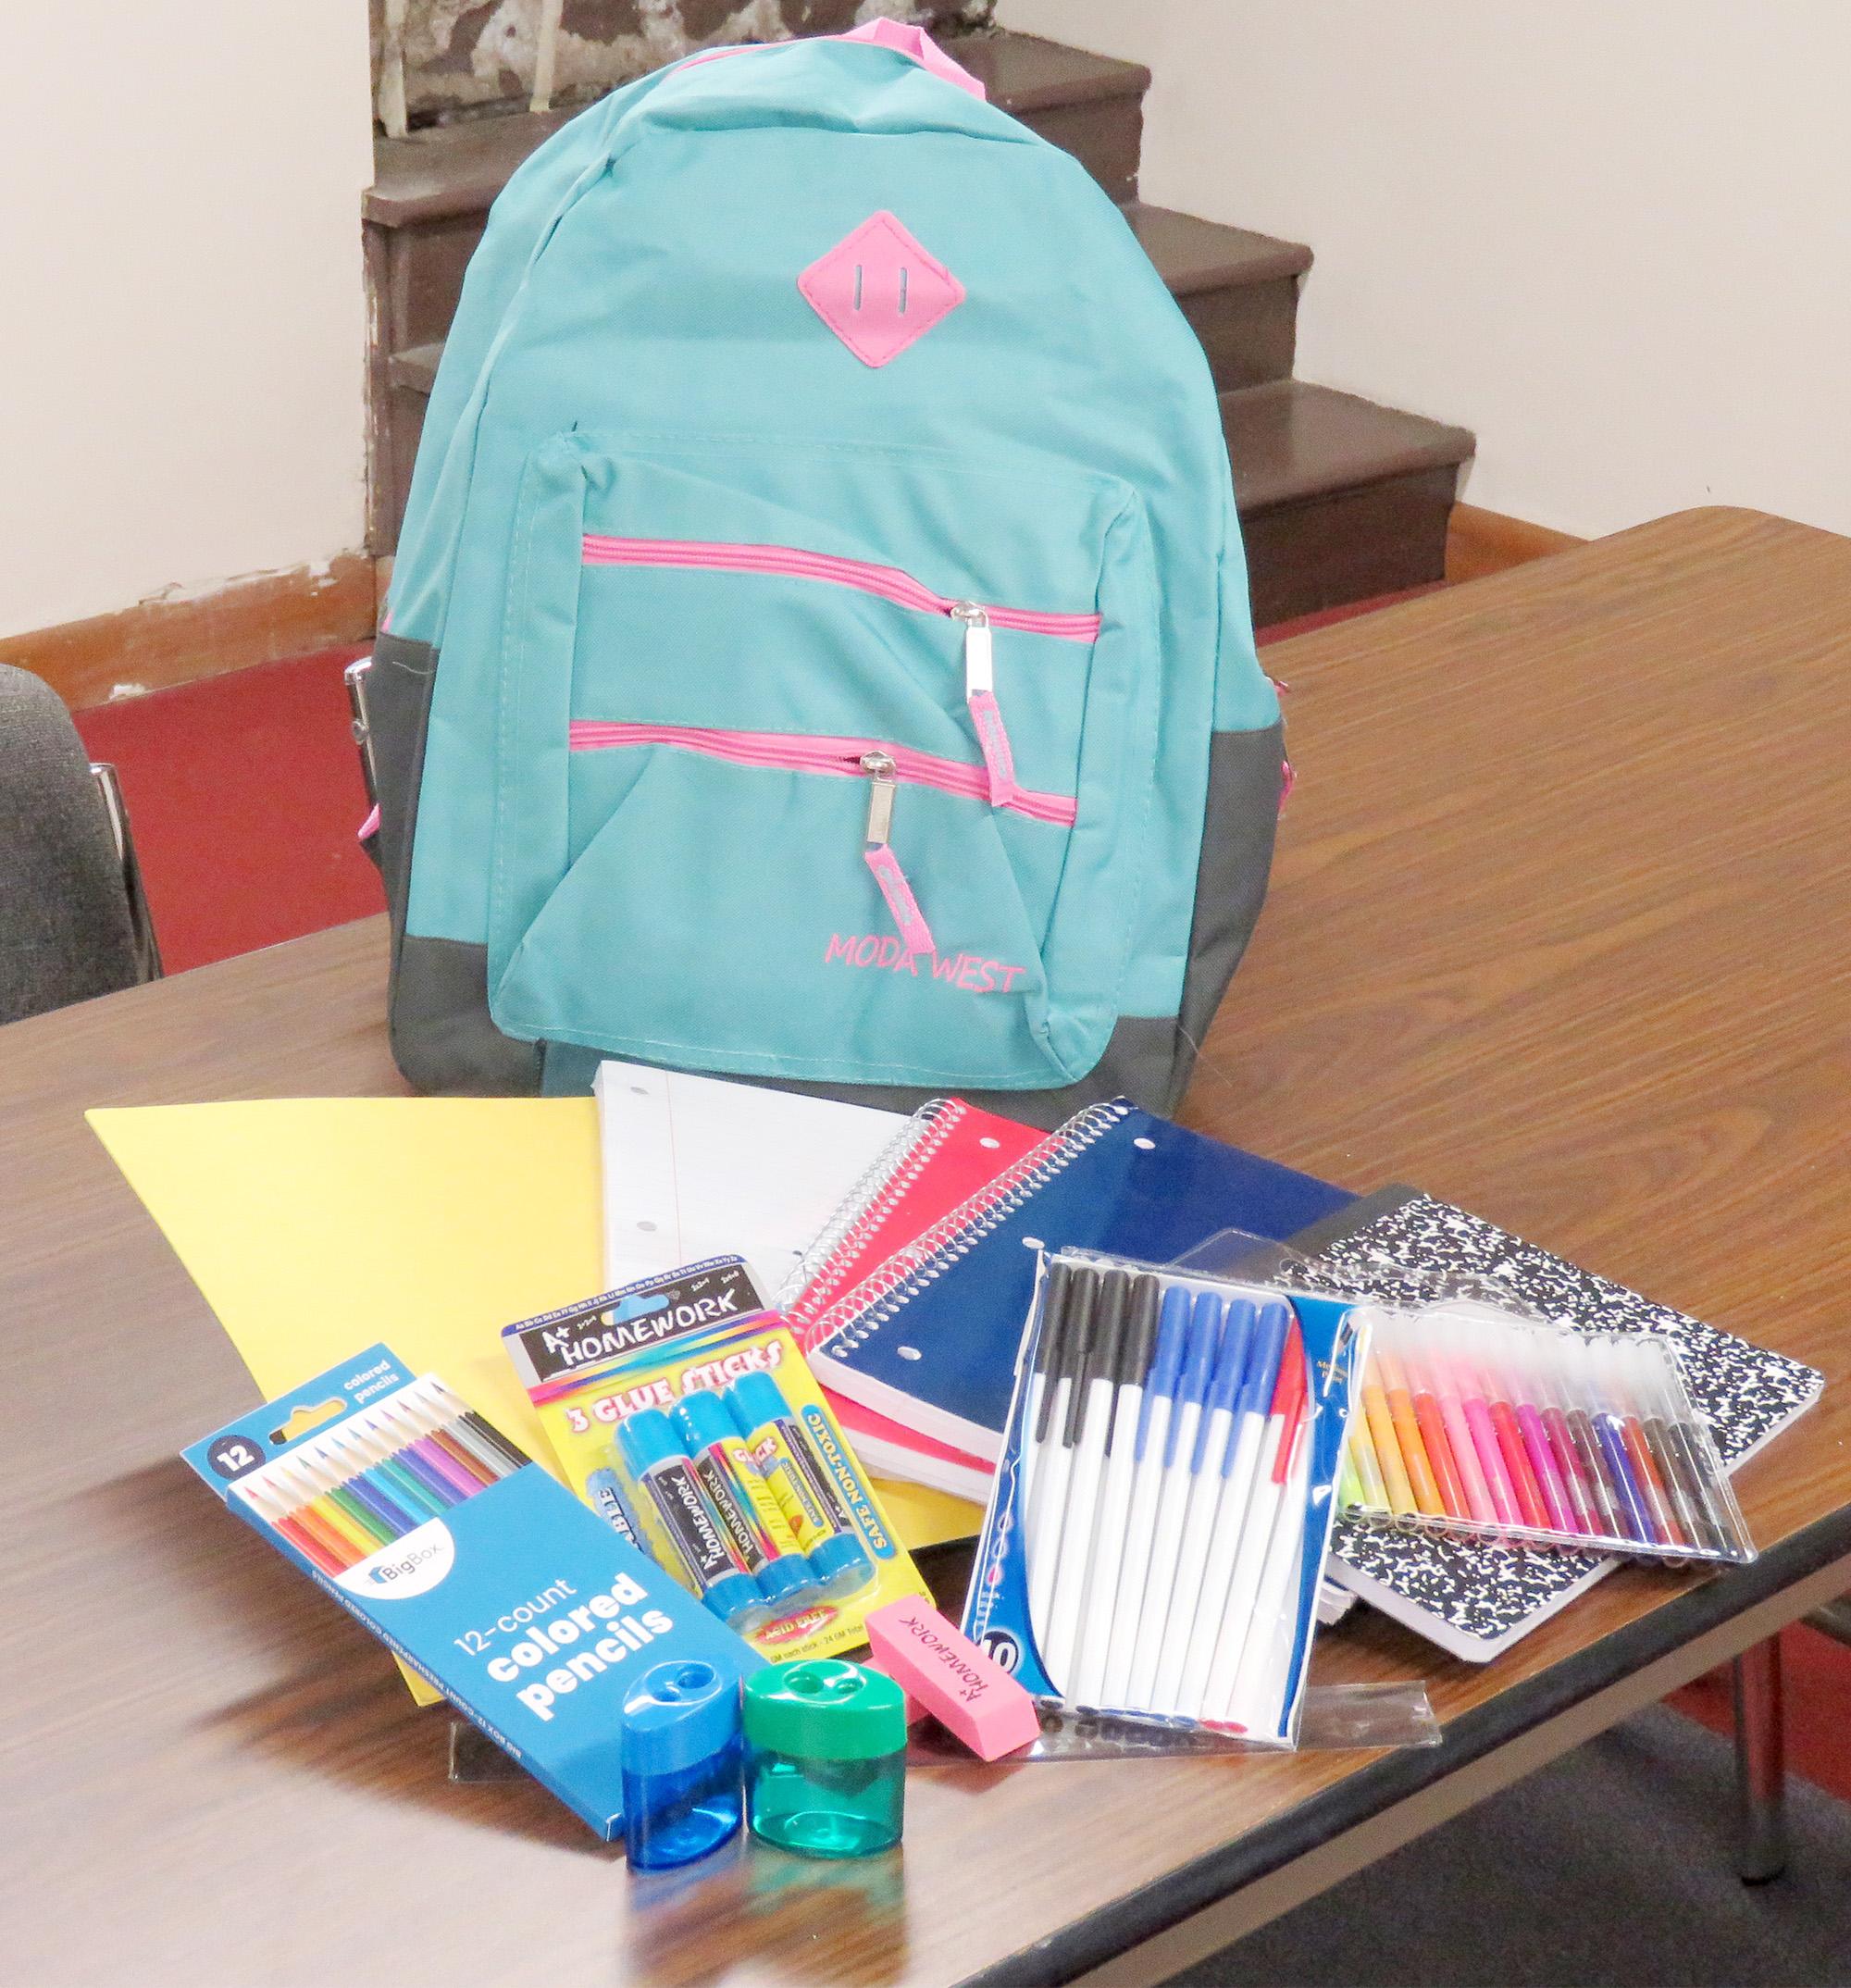 School supplies and a backpack